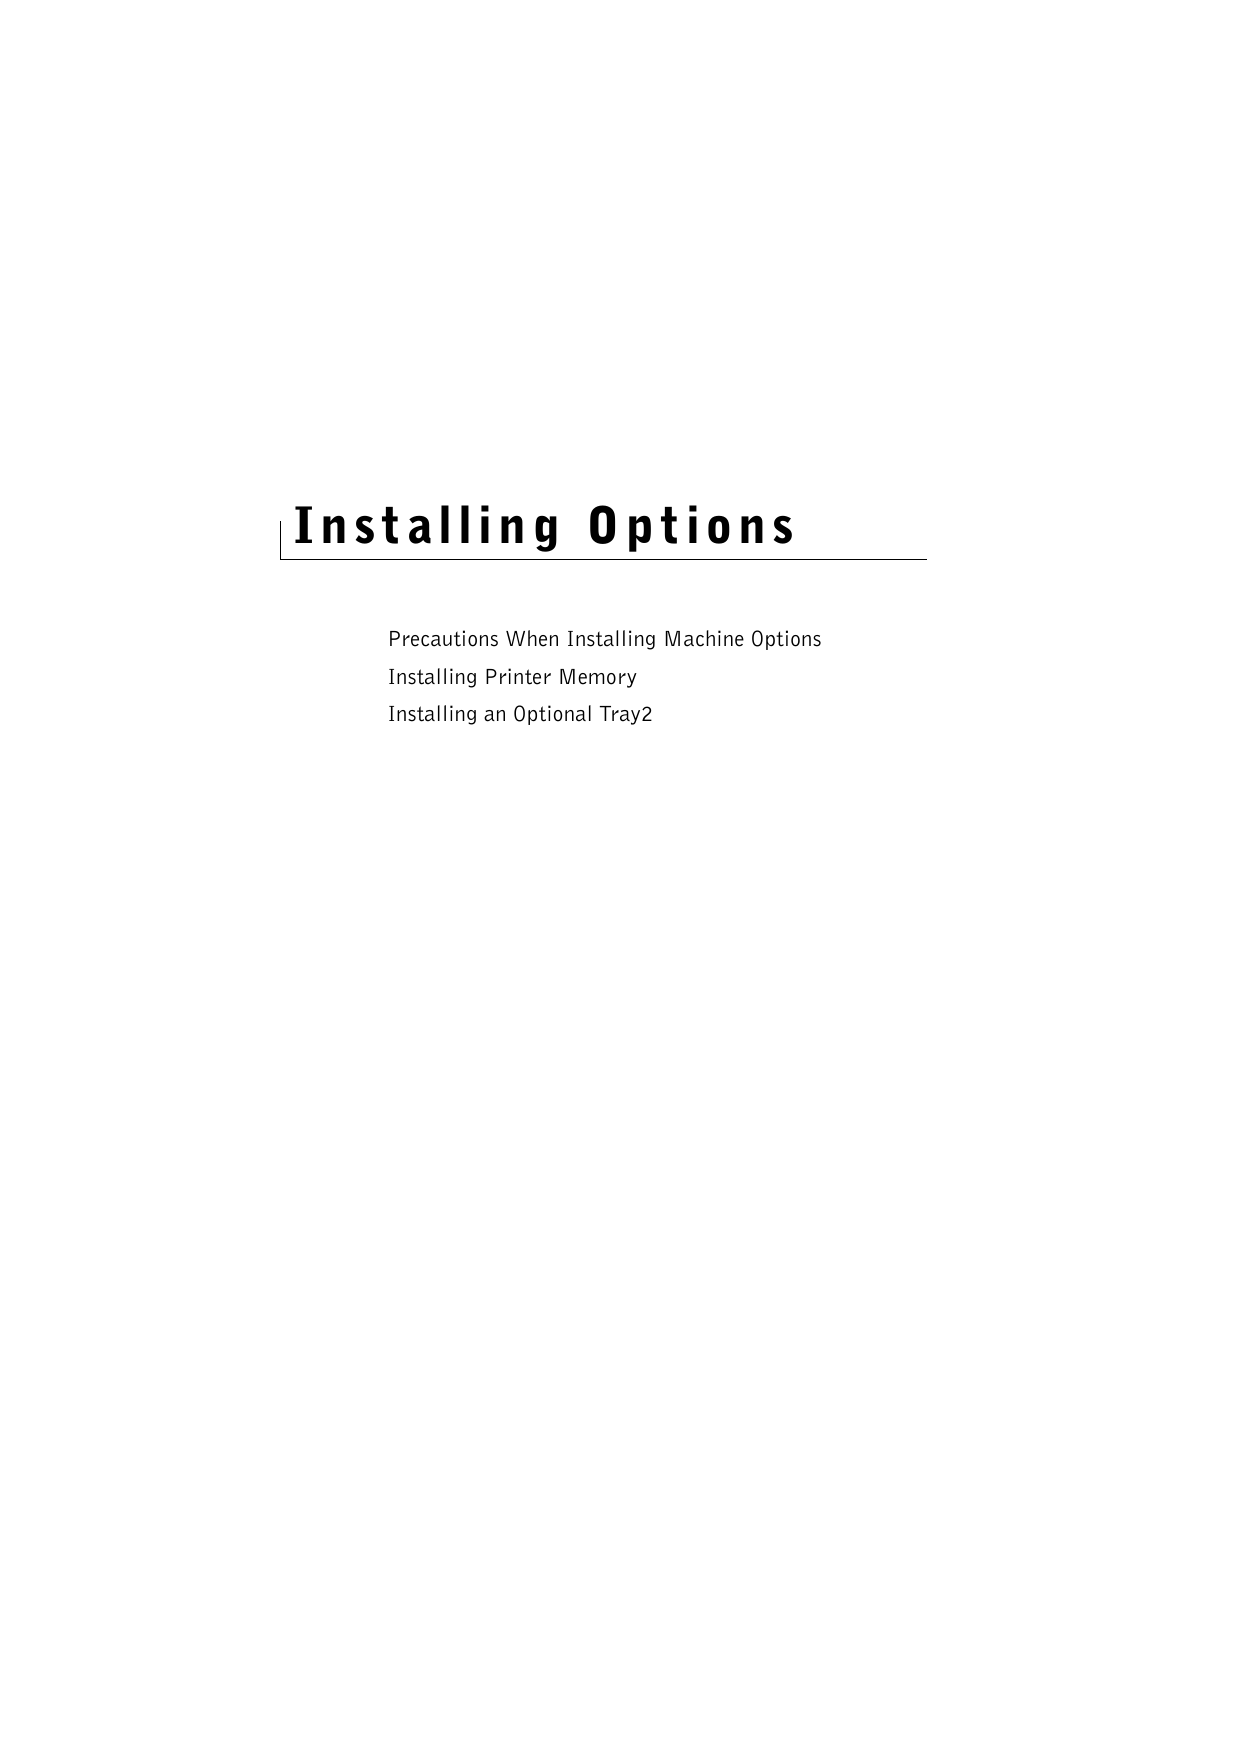 Installing OptionsPrecautions When Installing Machine OptionsInstalling Printer MemoryInstalling an Optional Tray2